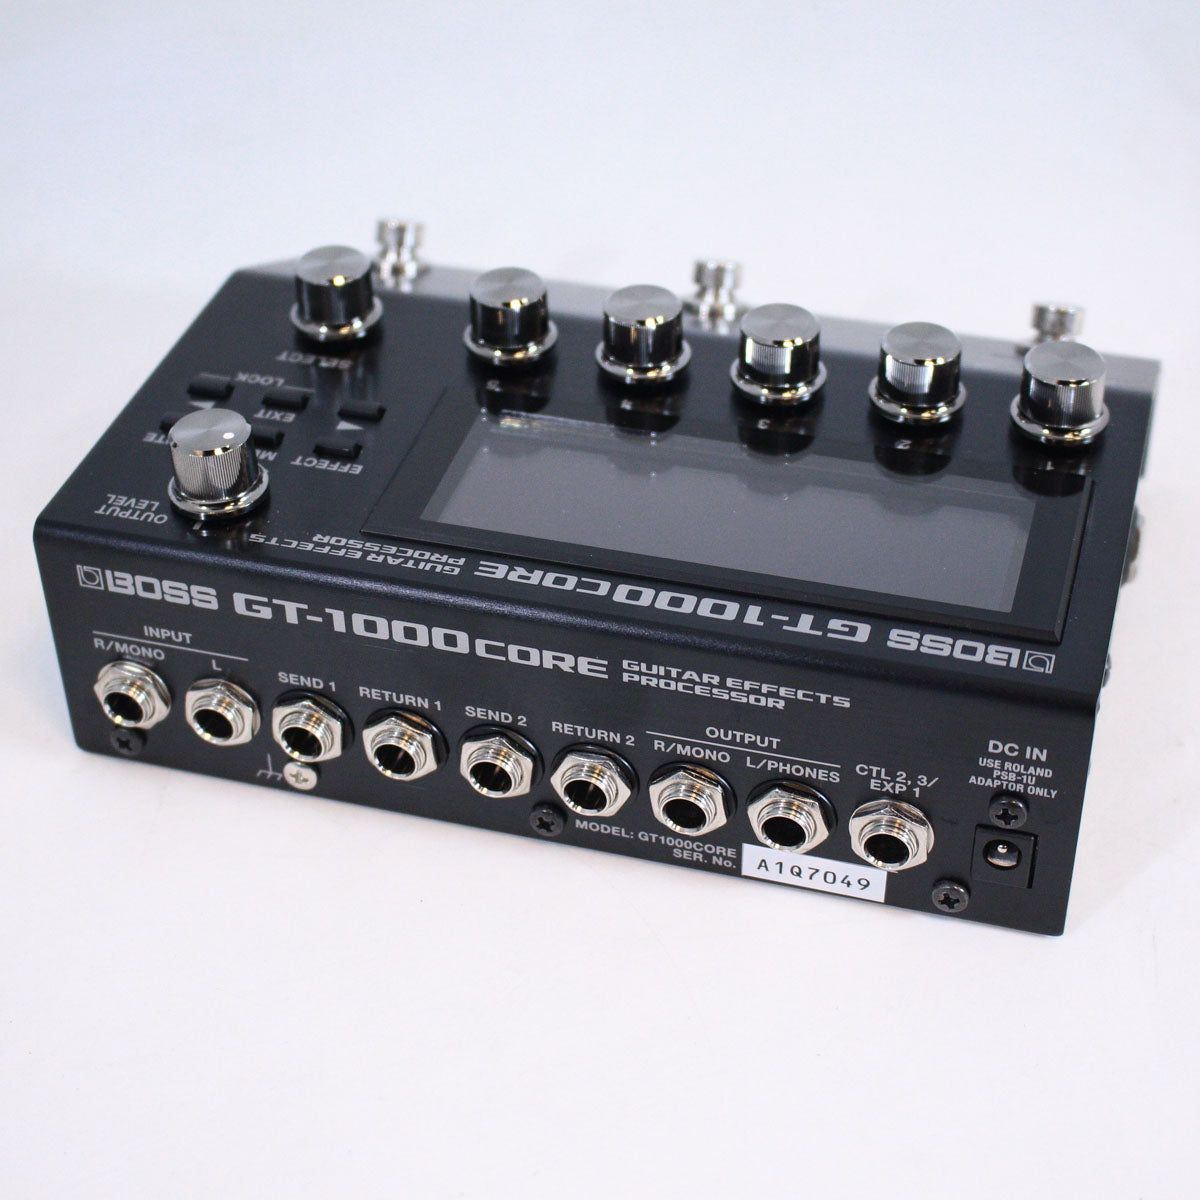 [SN A1Q7049] USED BOSS / GT-1000CORE / Guitar Effects Processor [05]